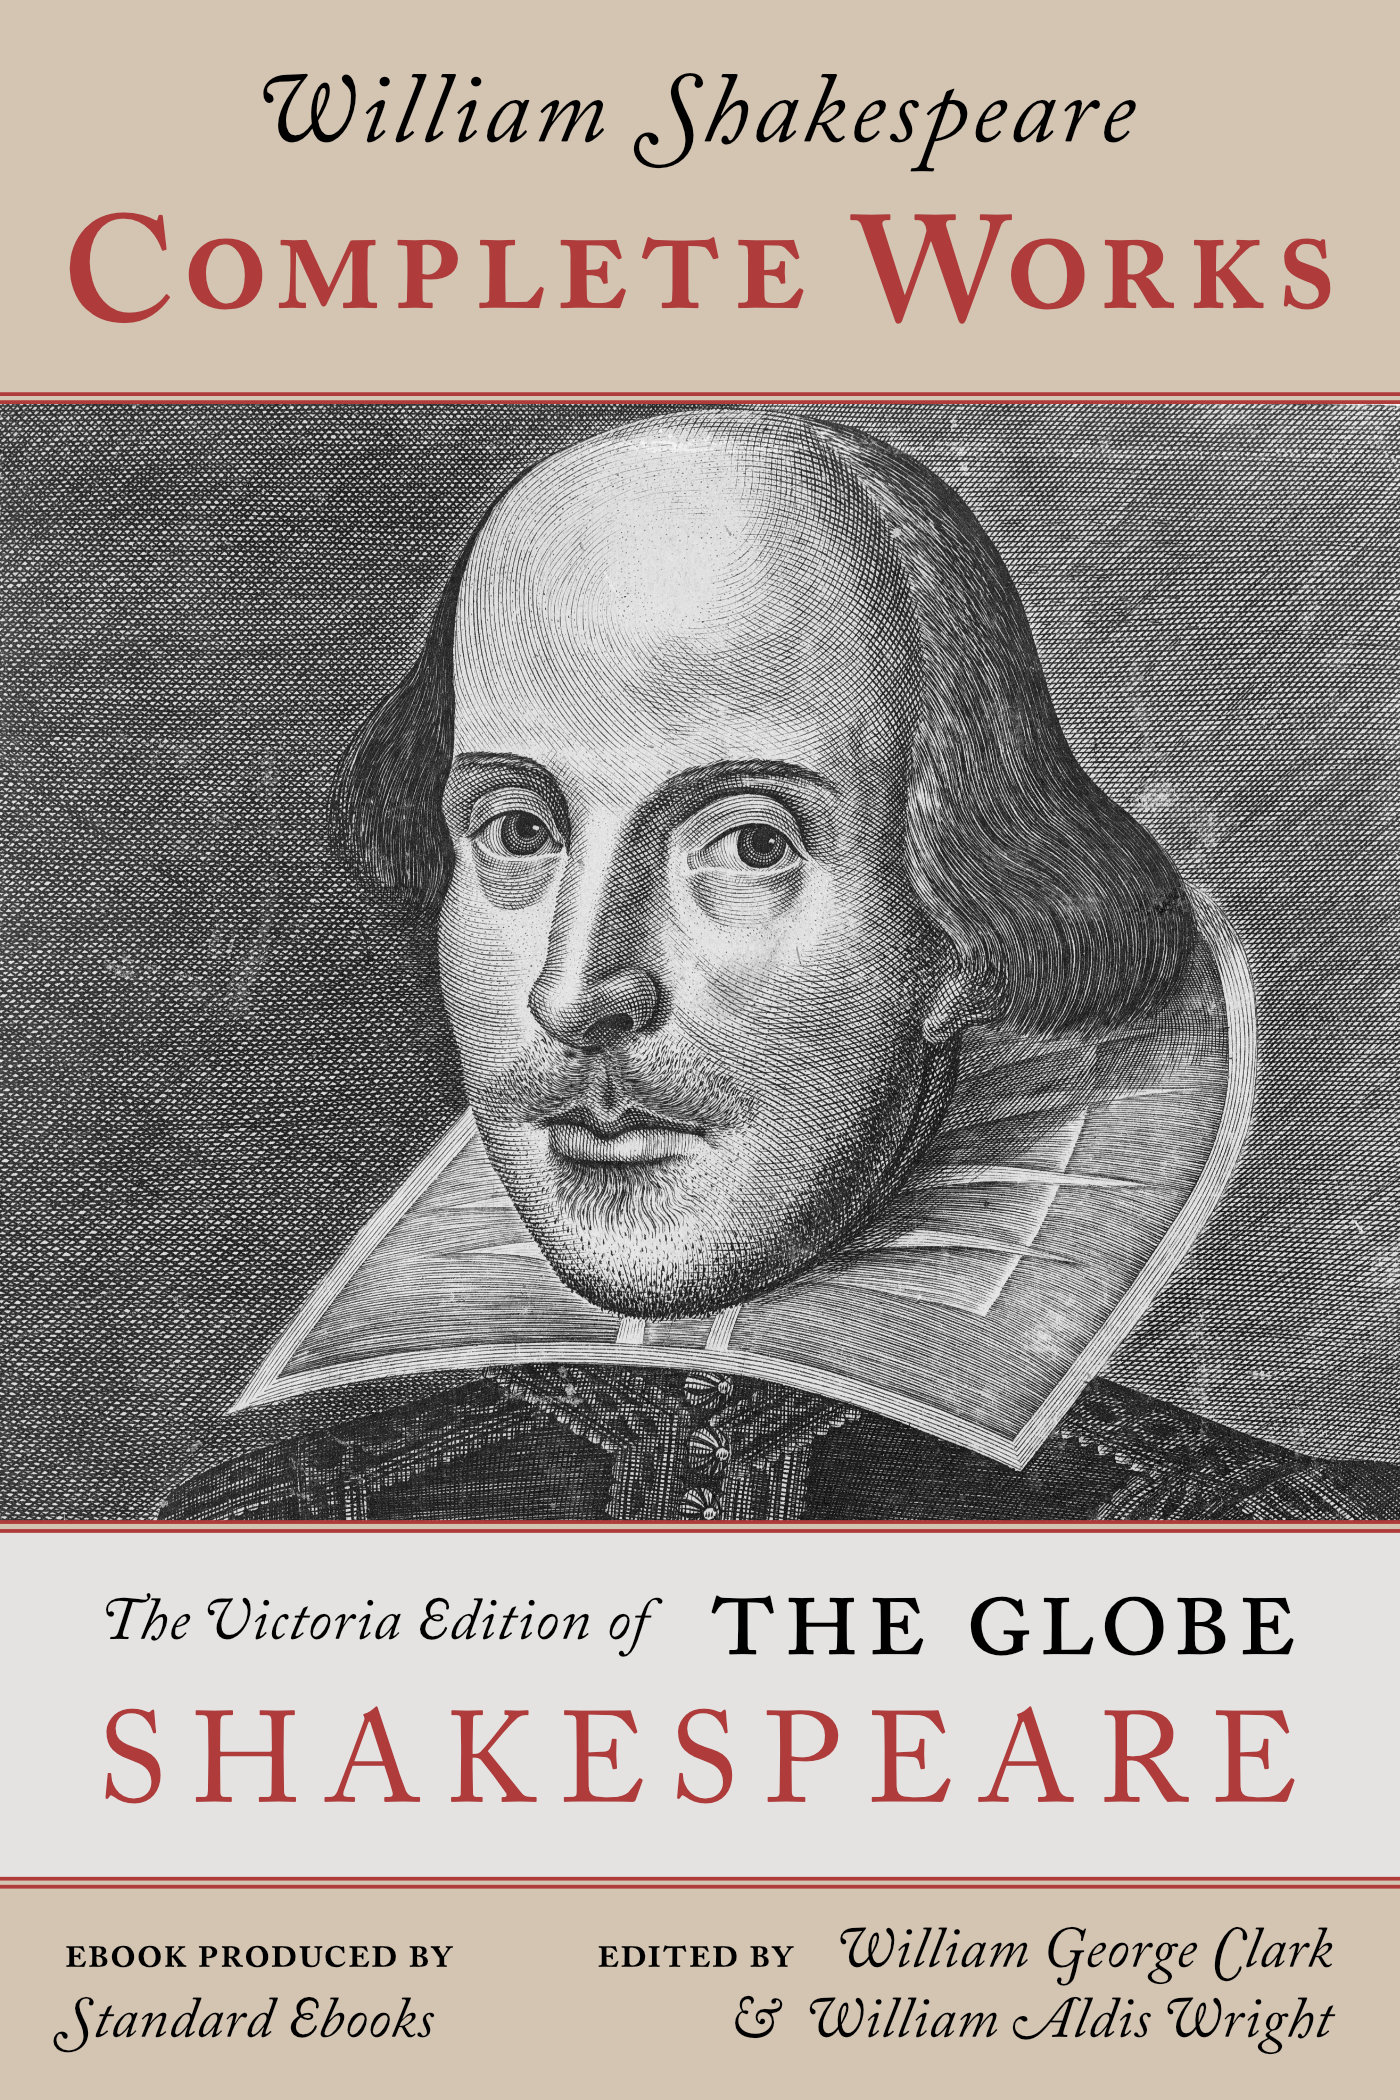 William Shakespeare’s Complete Works. The Victoria Edition of the Globe Shakespeare.